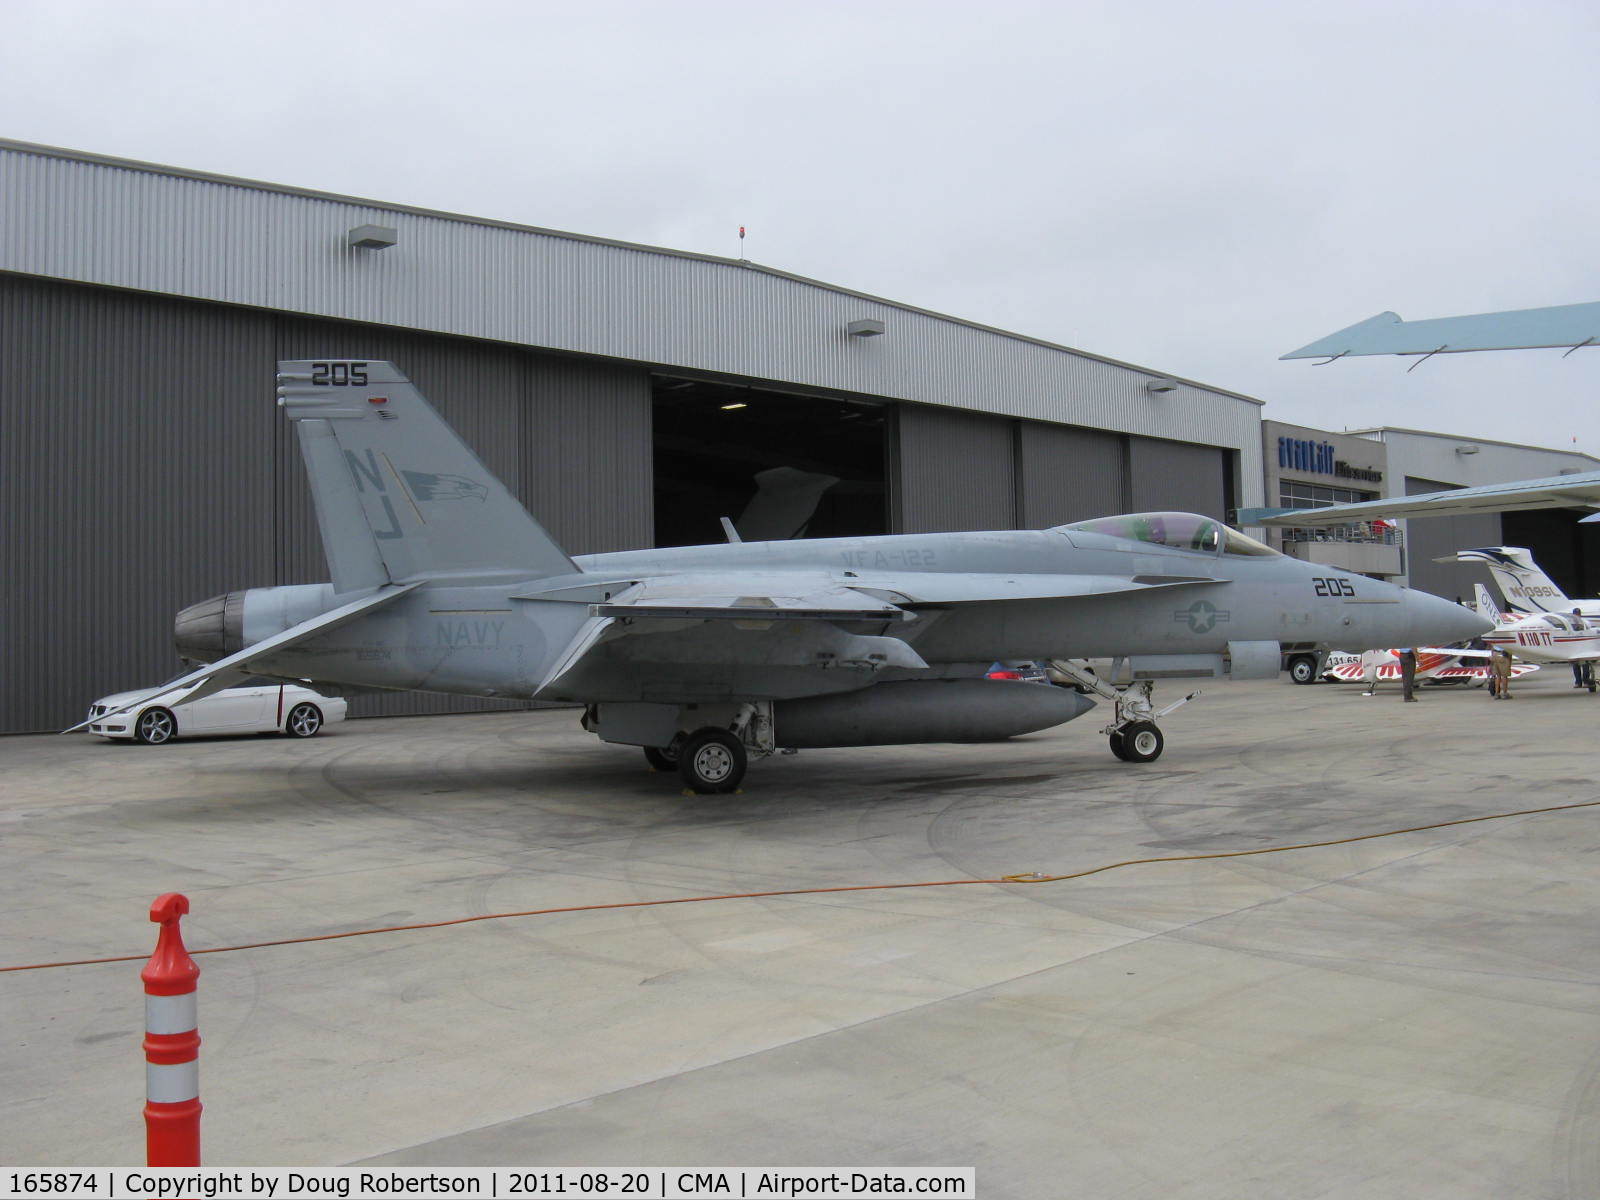 165874, Boeing F/A-18E Super Hornet C/N E050, Boeing F/A-18E SUPER HORNET, two General Electric F414-GE 400 Turbofans, 14.000 lb thrust each, 22,000 lb thrust each with afterburner